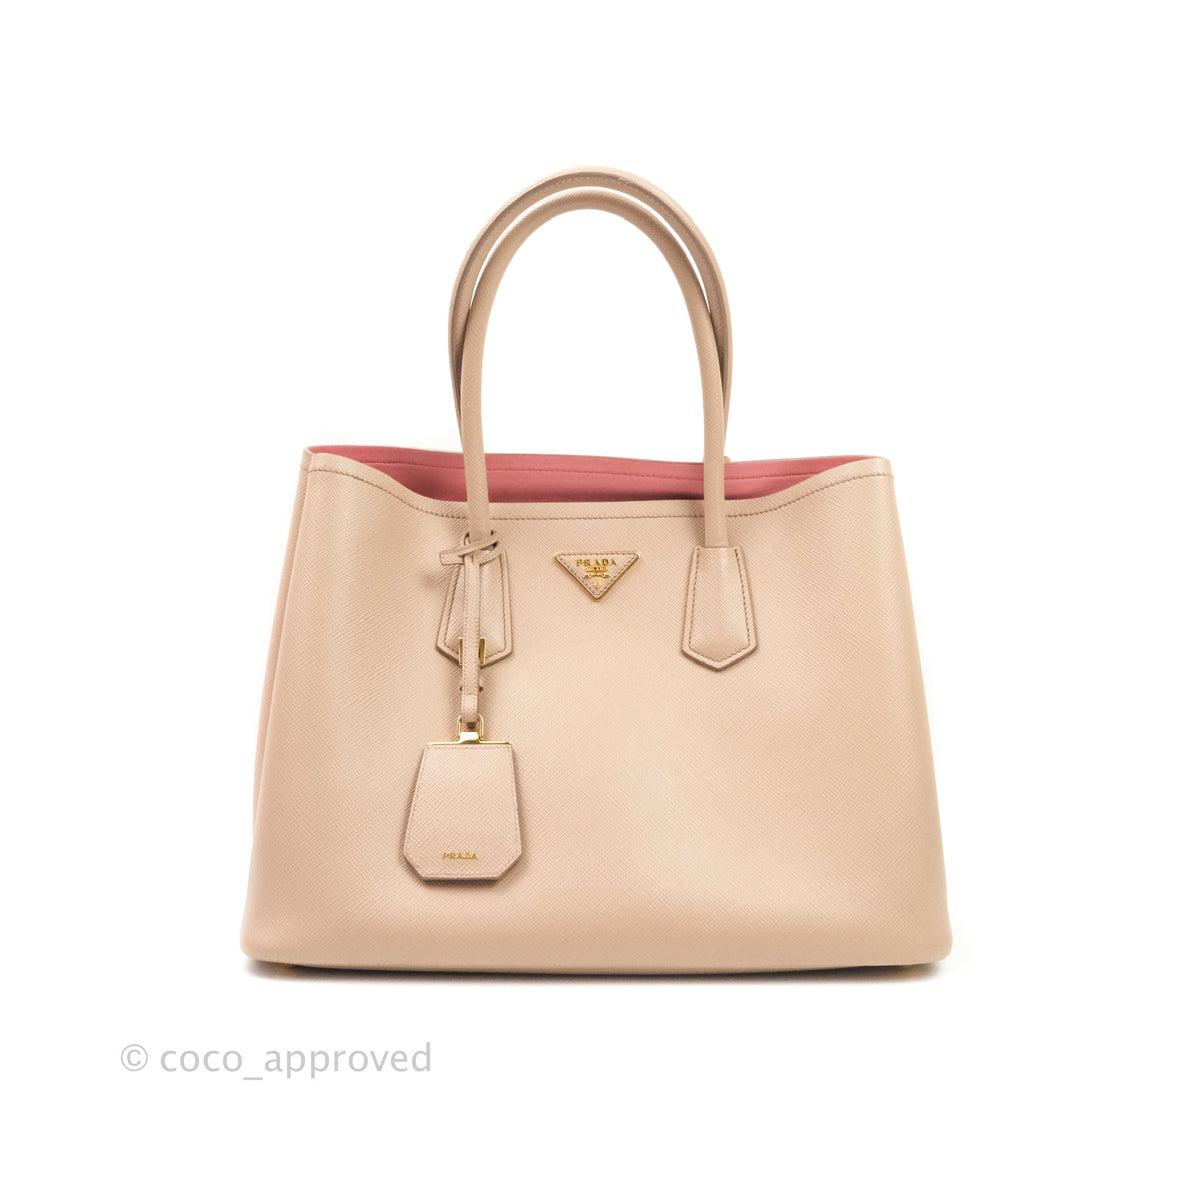 Prada Large Saffiano Cuir Double Prada Bag in Cameo/Rose Gold Hardware –  Coco Approved Studio